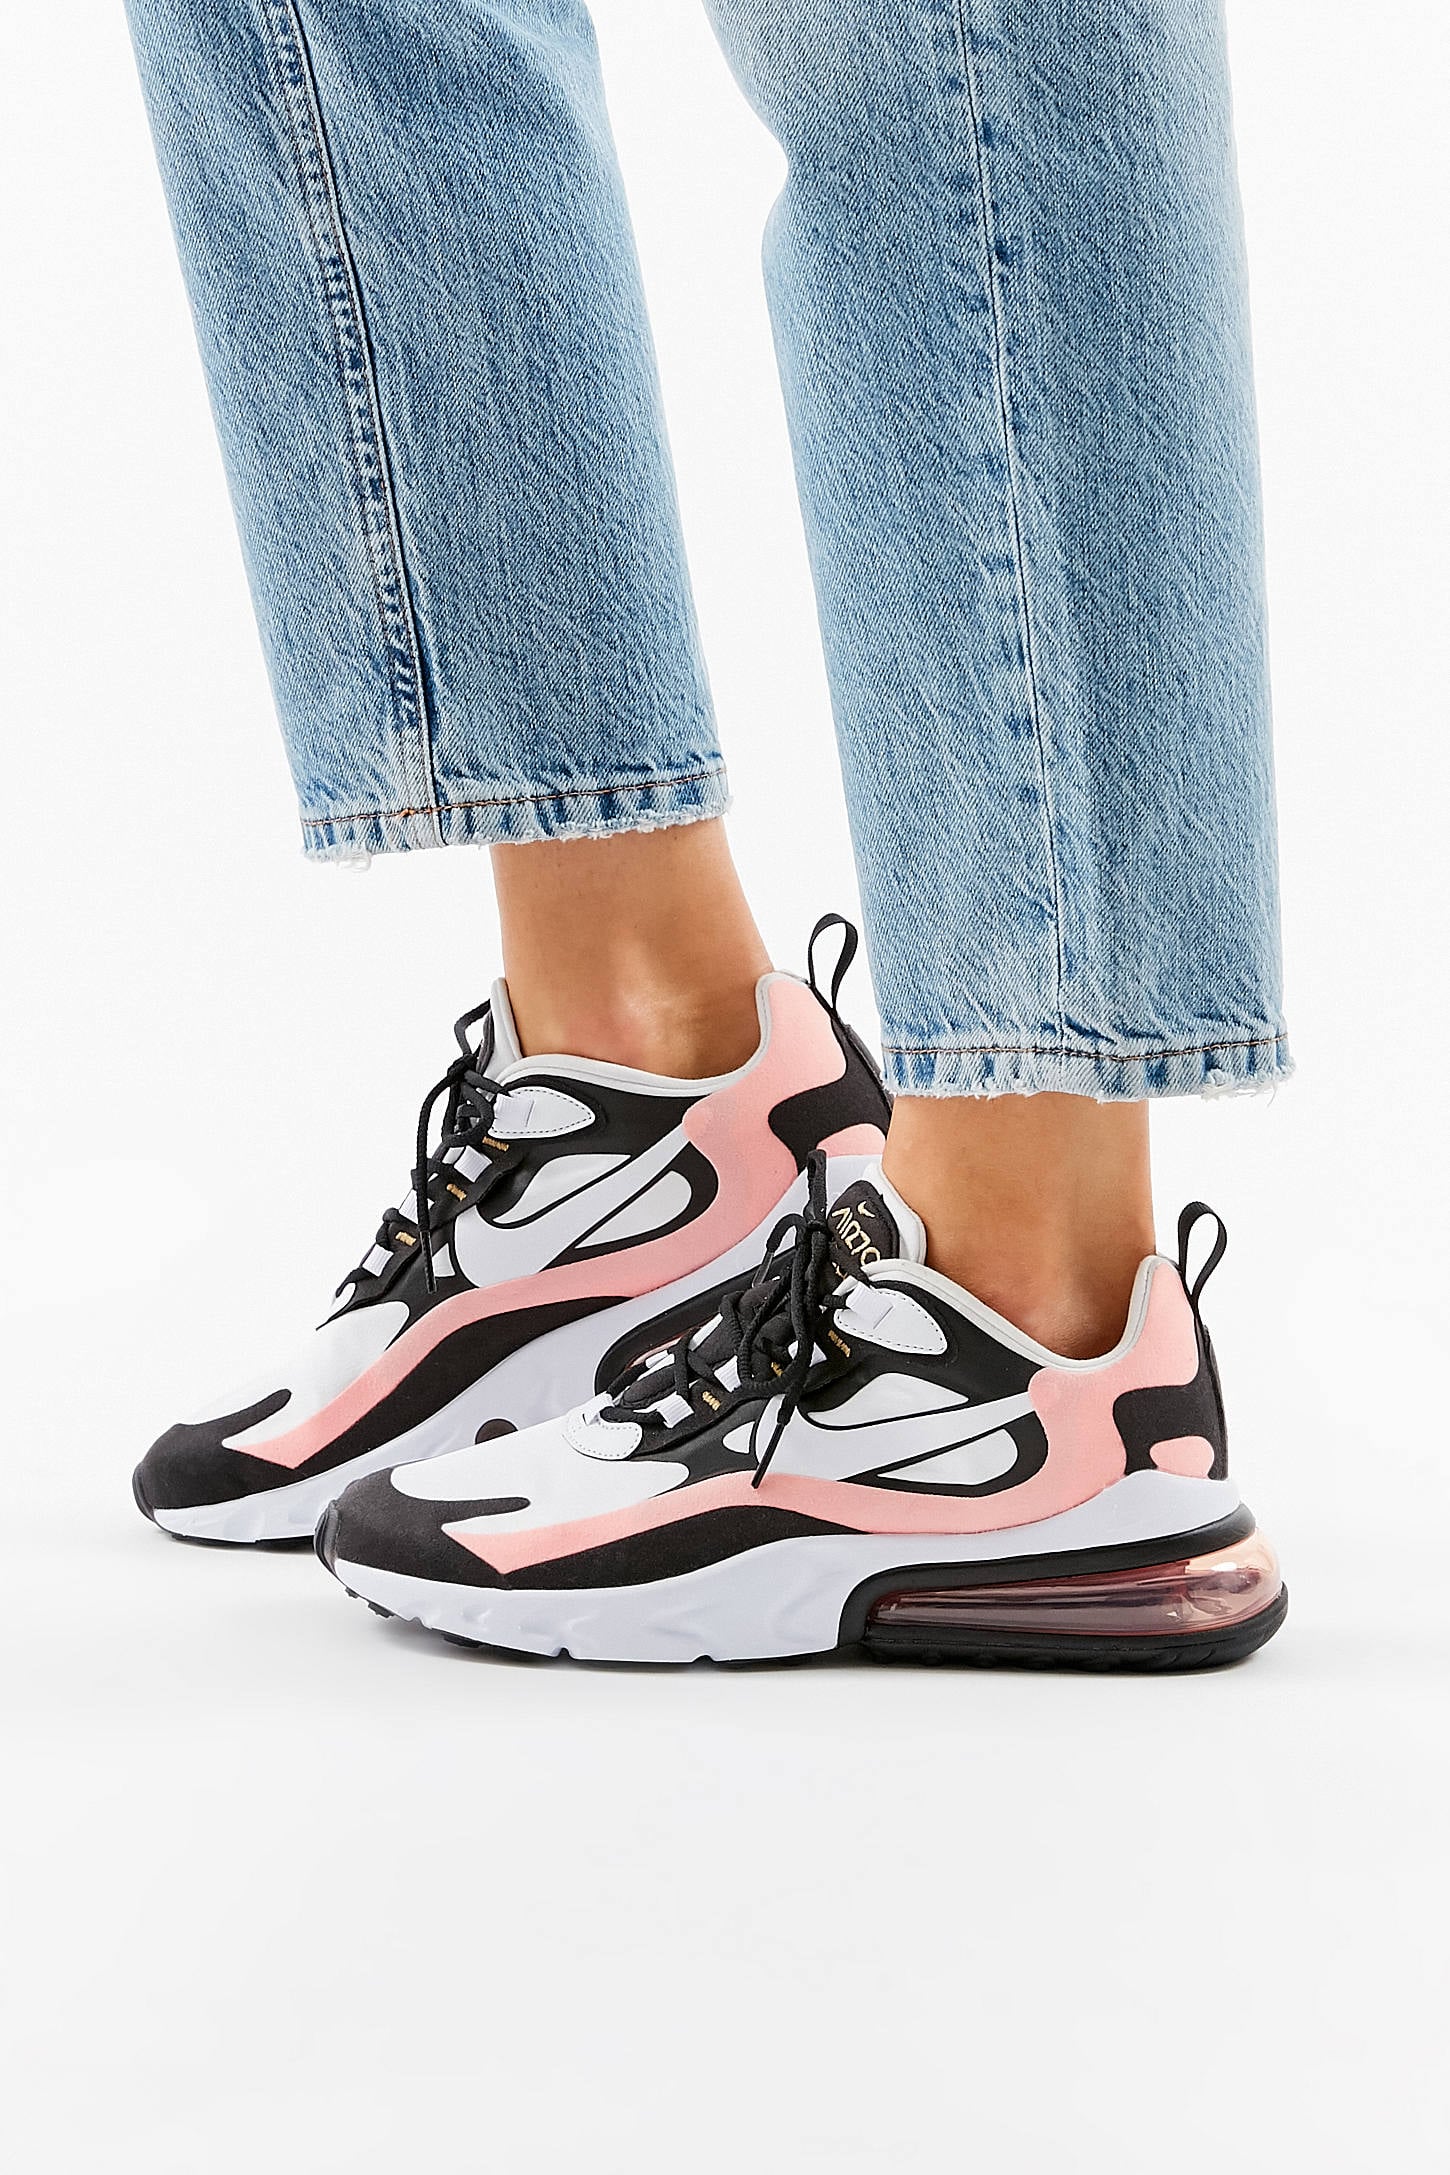 Nike Air Max 270 React Sneaker | I'm Deal Hunter, and These Are the 26 Sale Items I Recommend For March POPSUGAR Fashion Photo 15